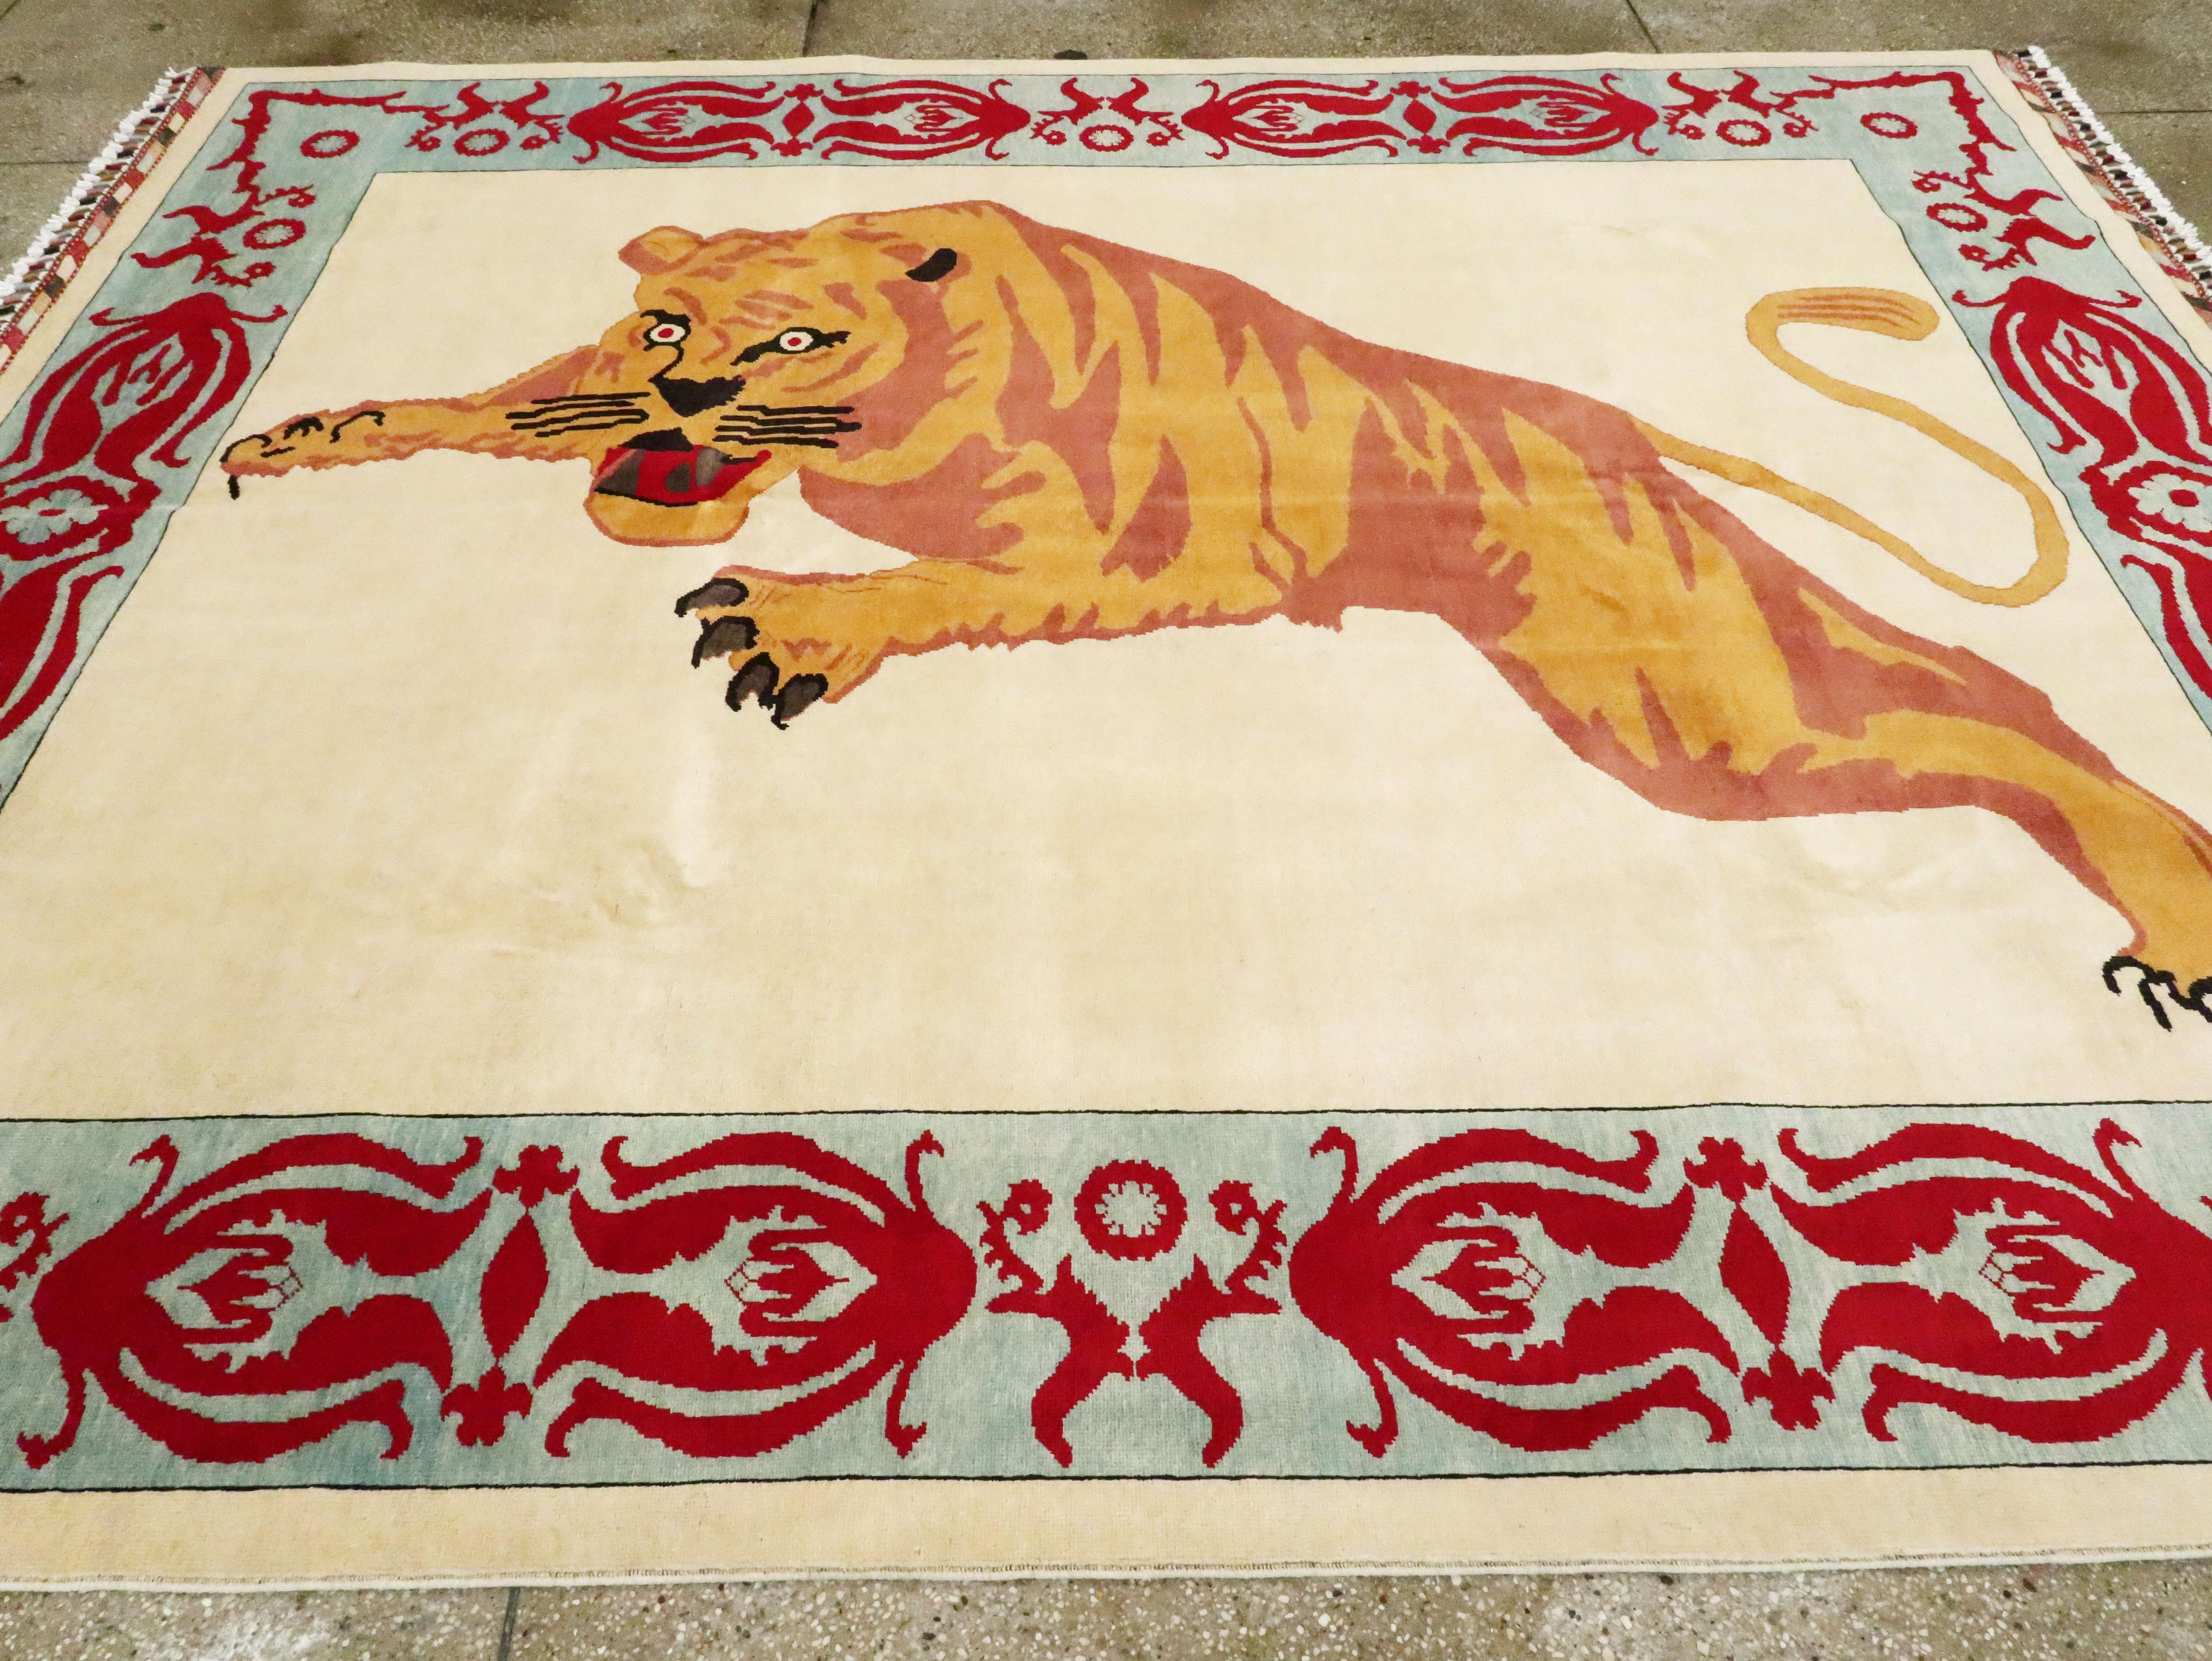 A modern Turkish pictorial carpet of a pouncing tiger from the 21st century. The tiger sits atop an ivory field enclosed with a seafoam blue border with large floral motifs in red.

Measures: 8' 1